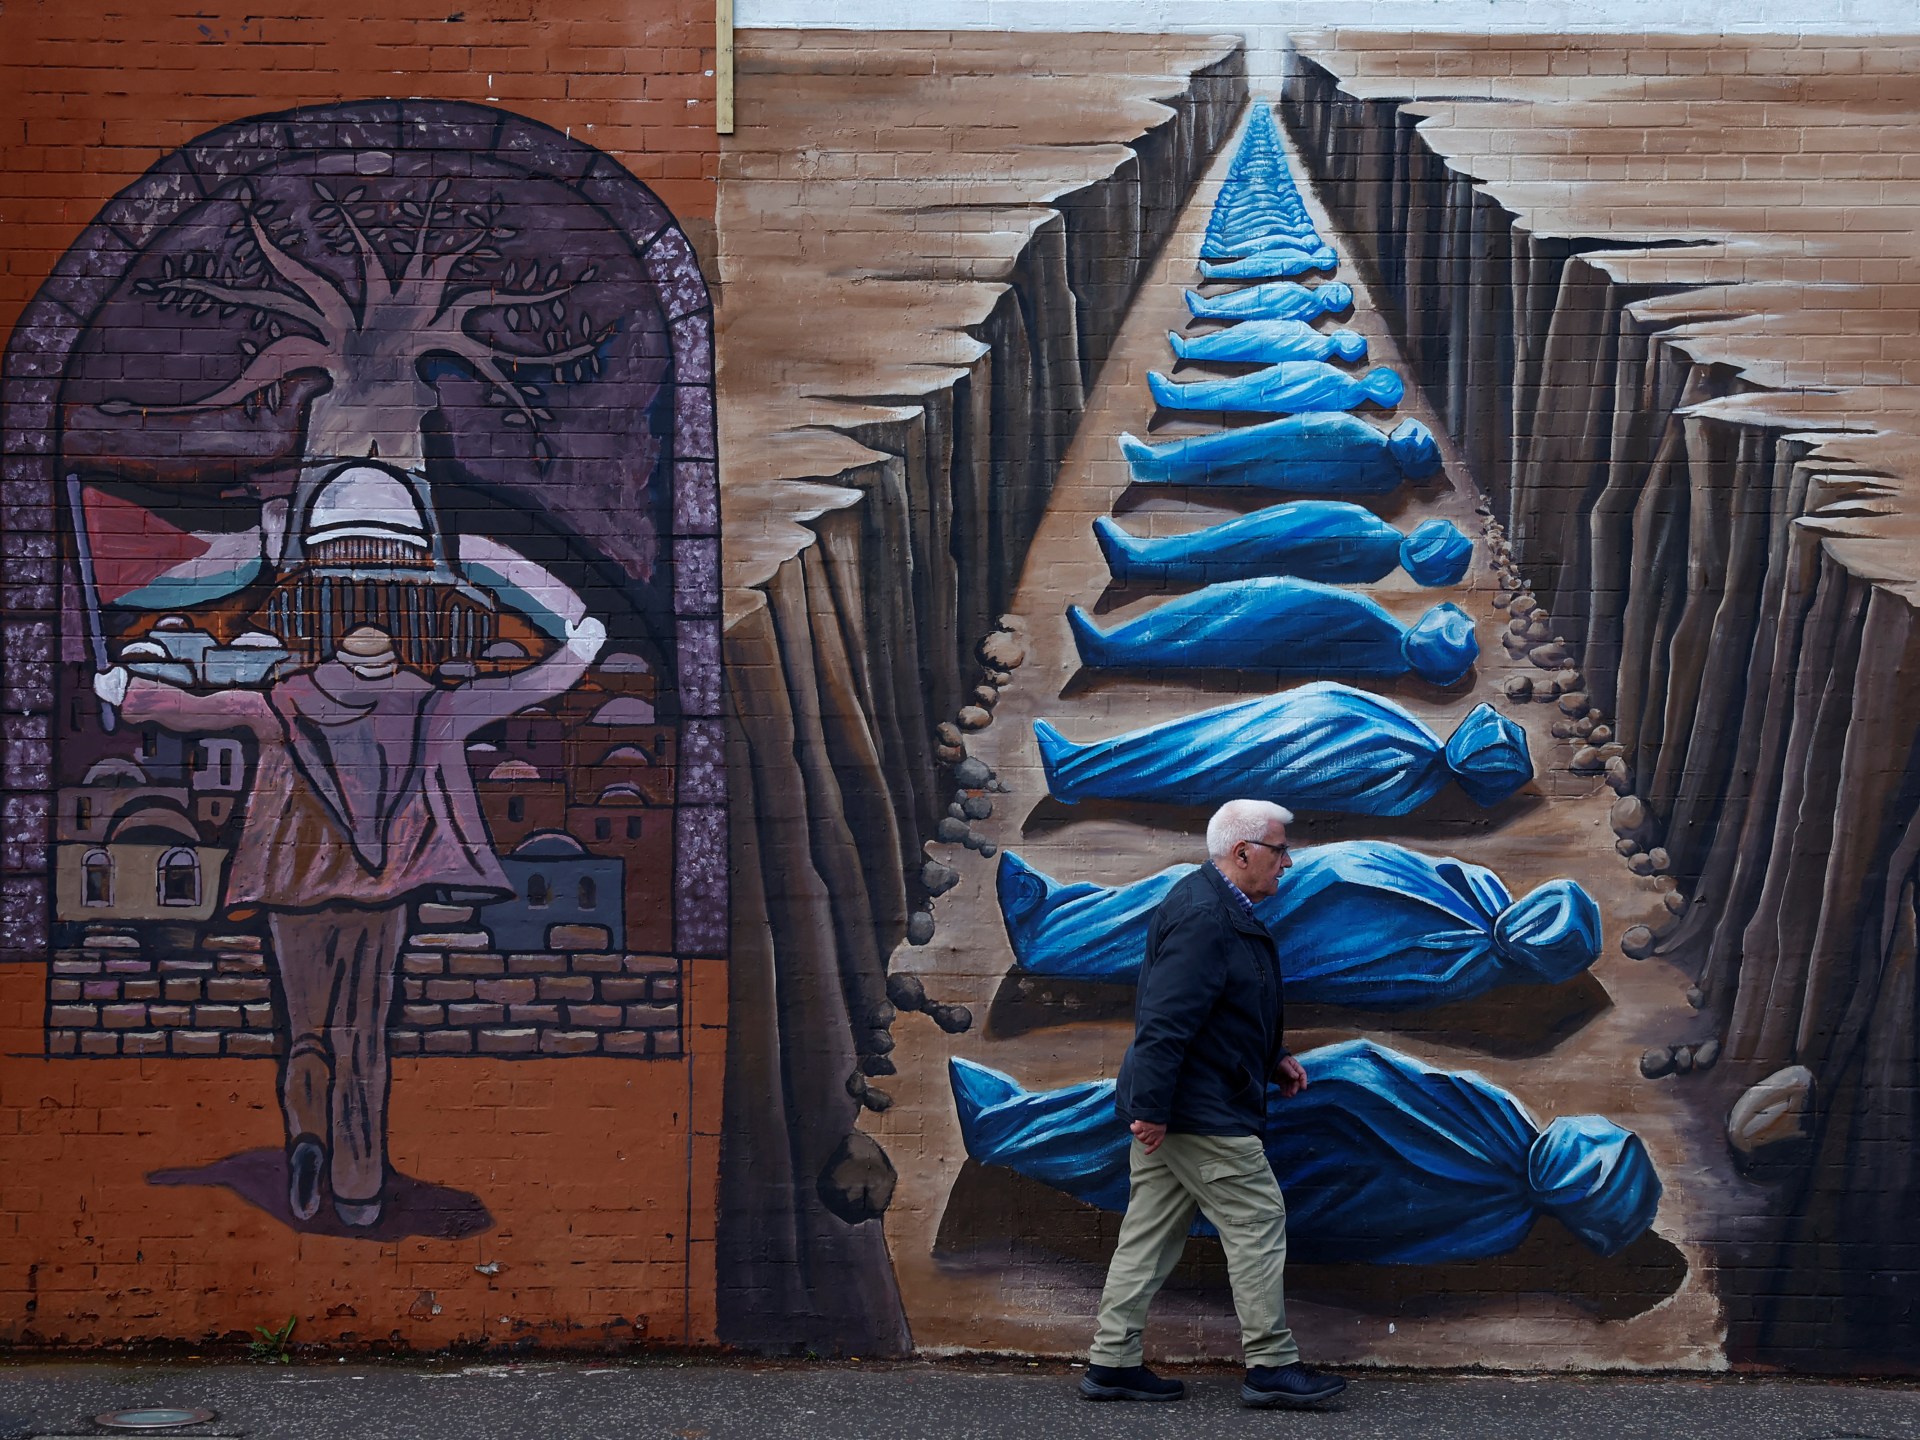 Belfast mural artists put up powerful show of solidarity with Gaza